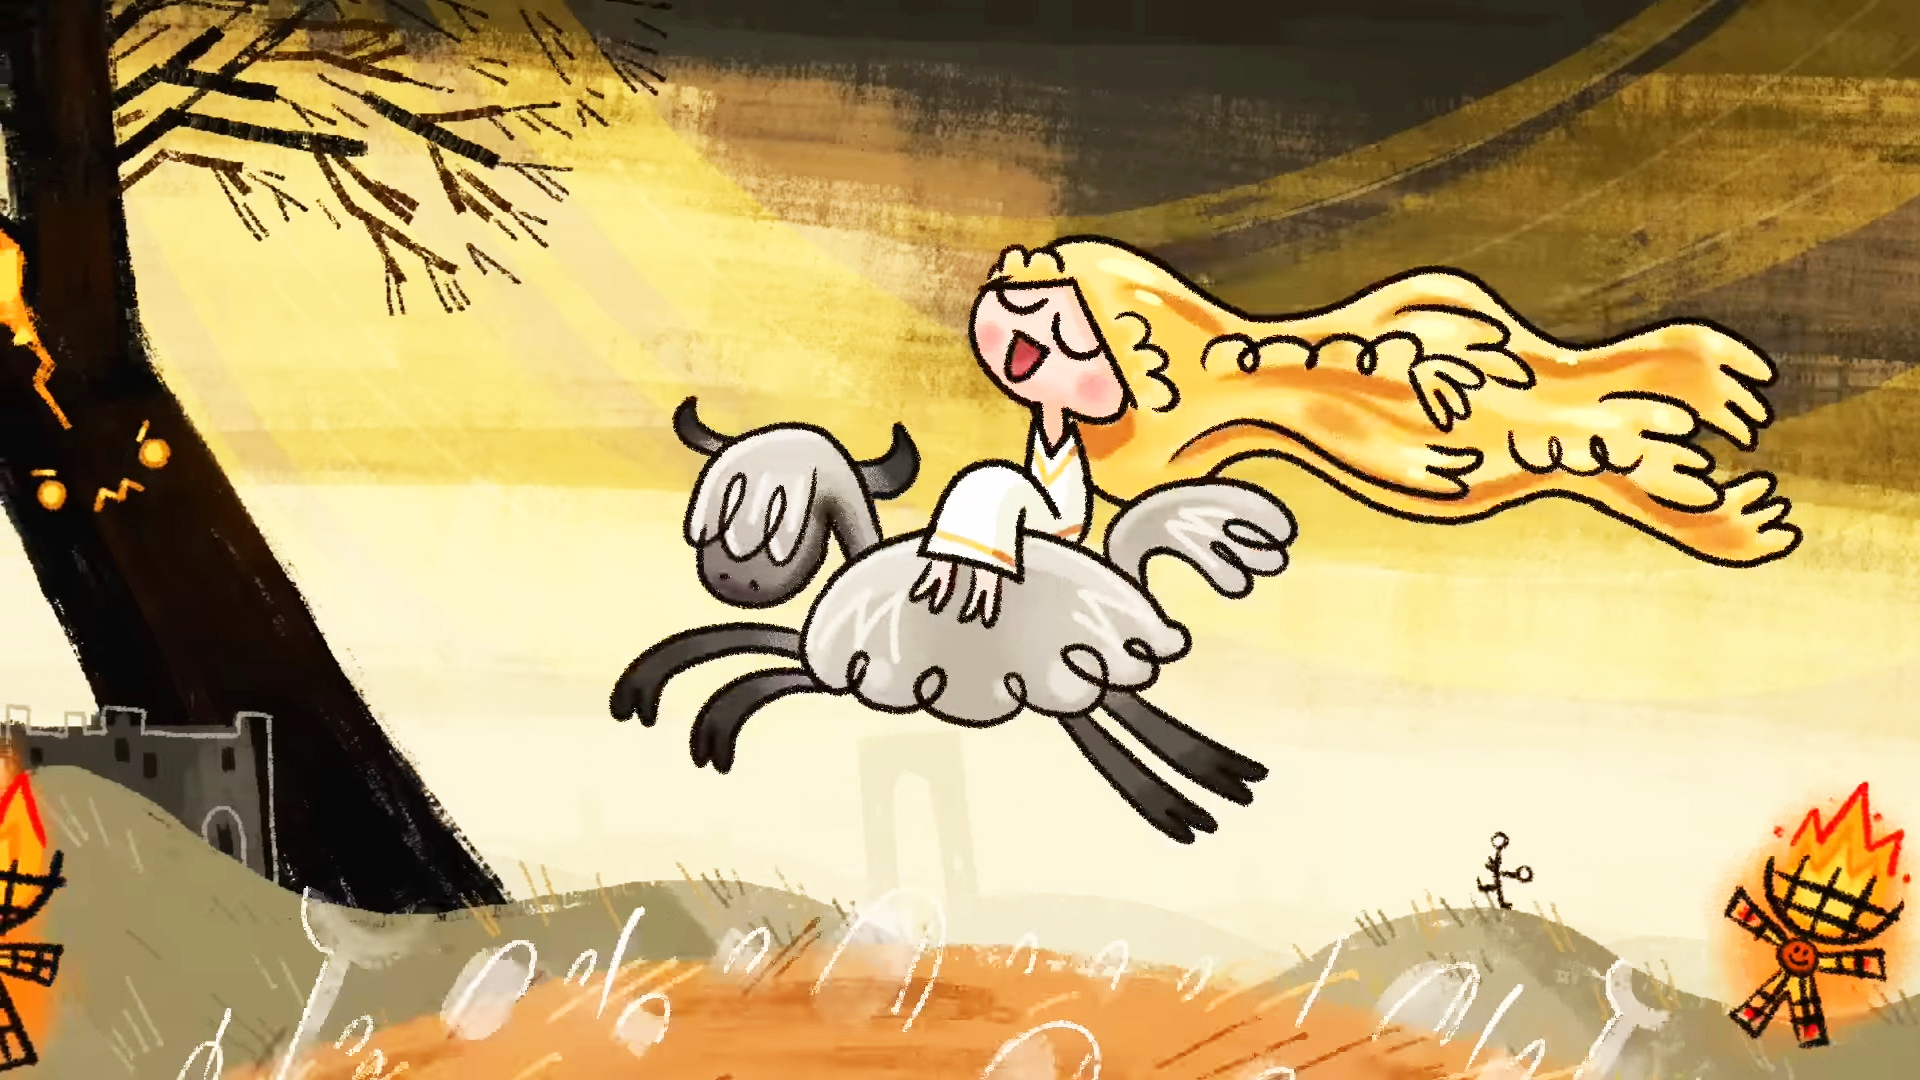  A Google Doodle animator is my new favorite Elden Ring lore theorist thanks to this cartoon retelling of Shadow of the Erdtree set to a Taylor Swift song 